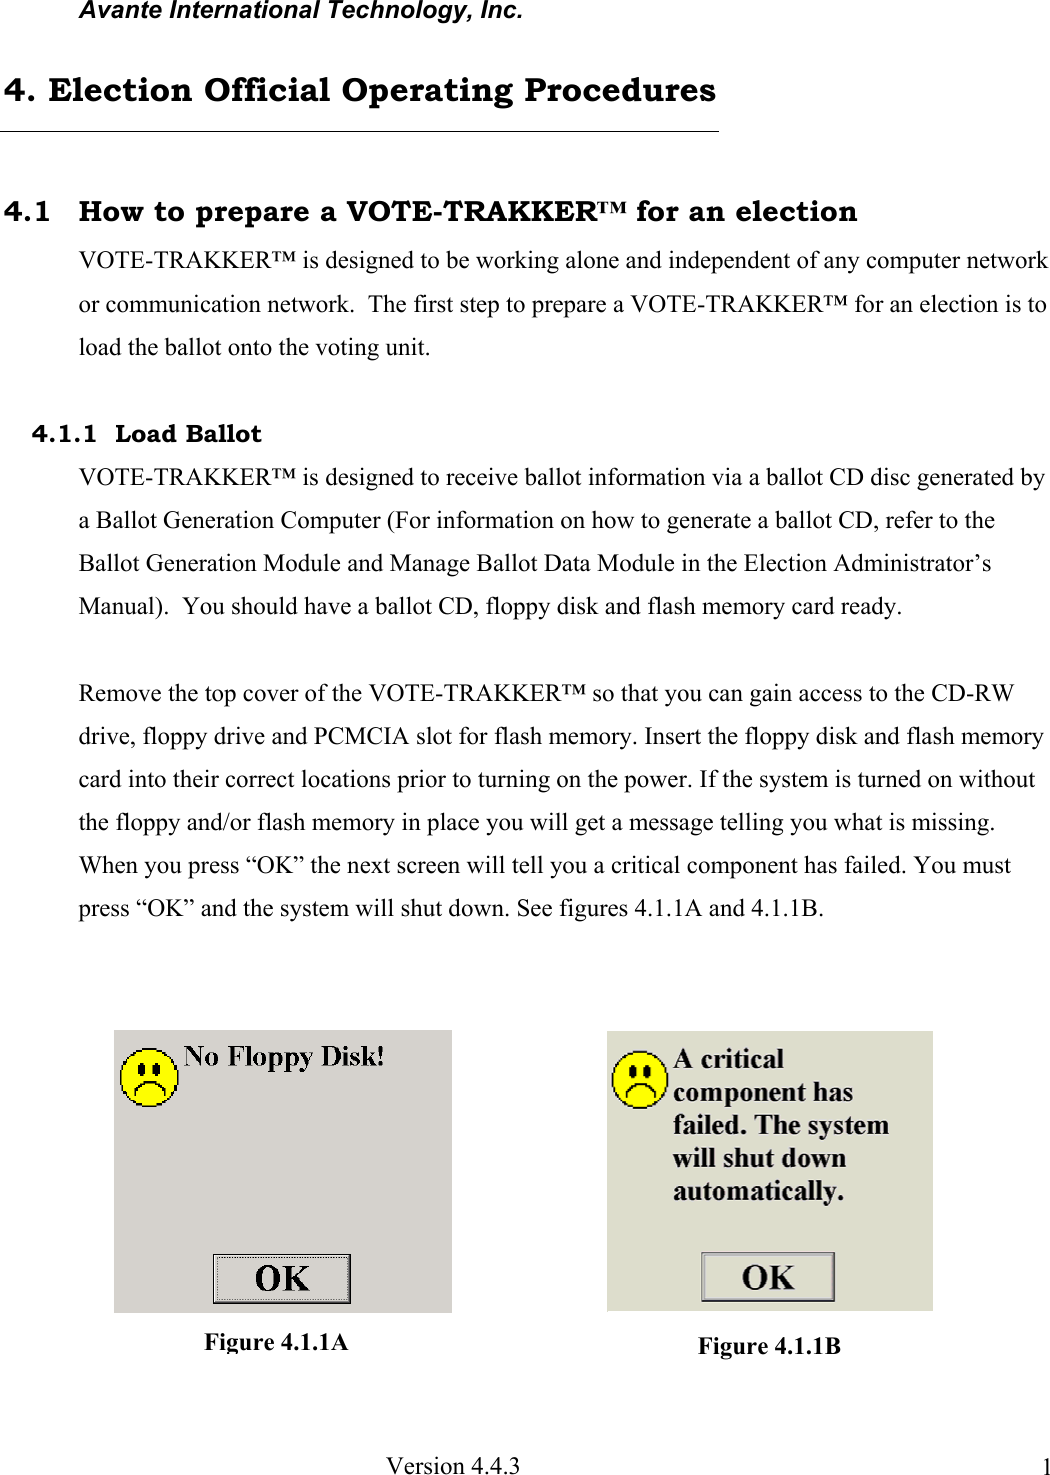 Avante International Technology, Inc.  Version 4.4.3  1 4.1  How to prepare a VOTE-TRAKKER™ for an election VOTE-TRAKKER™ is designed to be working alone and independent of any computer network or communication network.  The first step to prepare a VOTE-TRAKKER™ for an election is to load the ballot onto the voting unit.  4.1.1  Load Ballot VOTE-TRAKKER™ is designed to receive ballot information via a ballot CD disc generated by a Ballot Generation Computer (For information on how to generate a ballot CD, refer to the Ballot Generation Module and Manage Ballot Data Module in the Election Administrator’s Manual).  You should have a ballot CD, floppy disk and flash memory card ready.  Remove the top cover of the VOTE-TRAKKER™ so that you can gain access to the CD-RW drive, floppy drive and PCMCIA slot for flash memory. Insert the floppy disk and flash memory card into their correct locations prior to turning on the power. If the system is turned on without the floppy and/or flash memory in place you will get a message telling you what is missing. When you press “OK” the next screen will tell you a critical component has failed. You must press “OK” and the system will shut down. See figures 4.1.1A and 4.1.1B.             4. Election Official Operating Procedures Figure 4.1.1B Figure 4.1.1A 